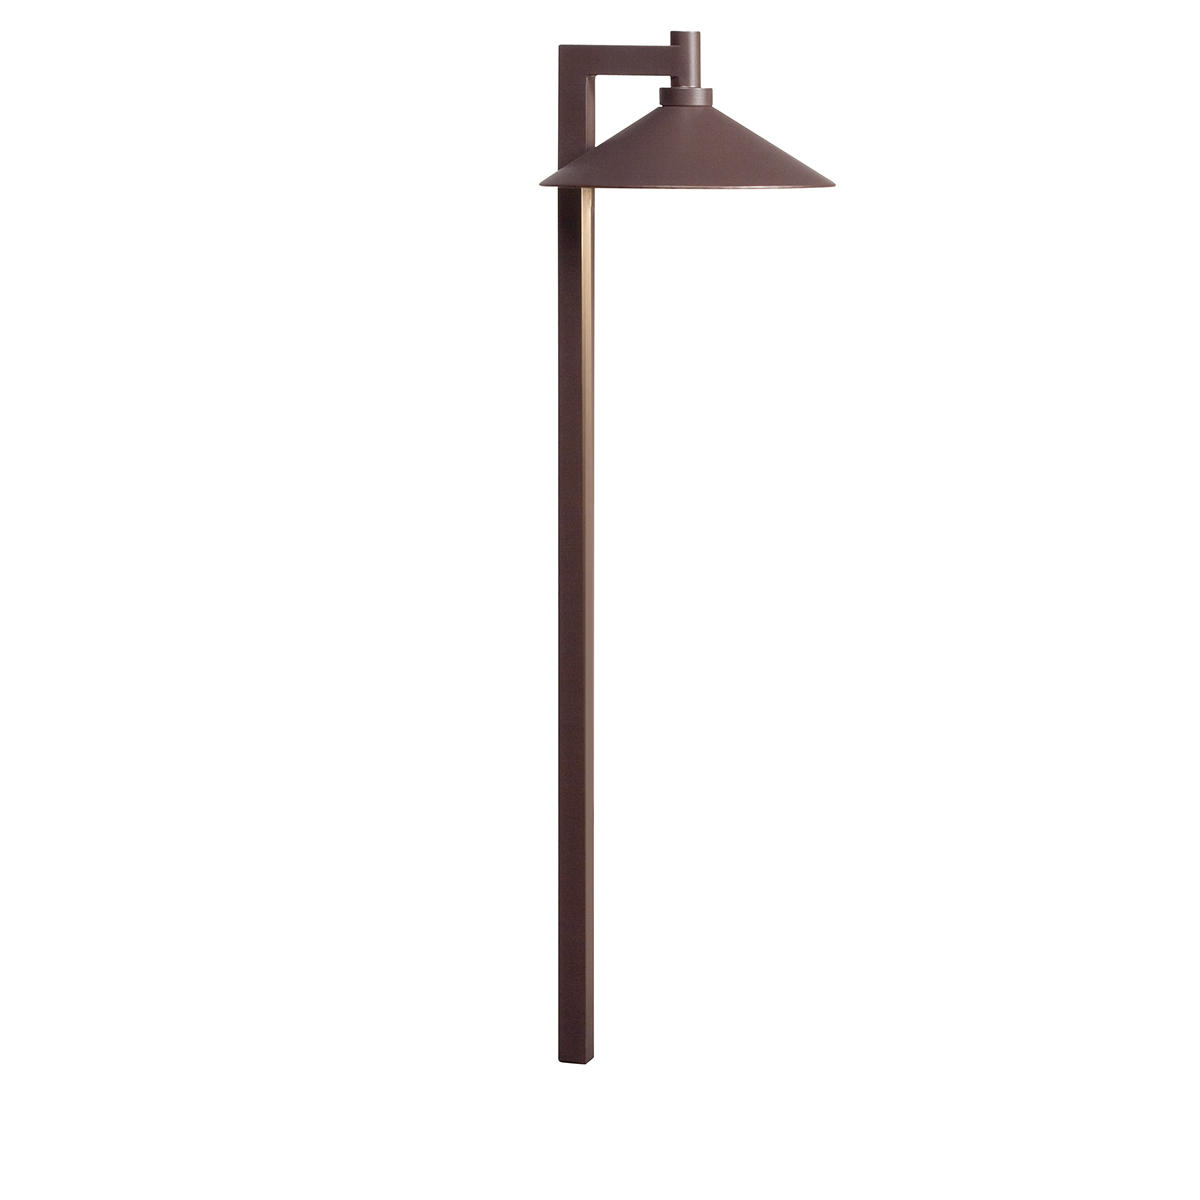 Kichler 15800AZT27R Led Ripley Path in Textured Architectural Bronze